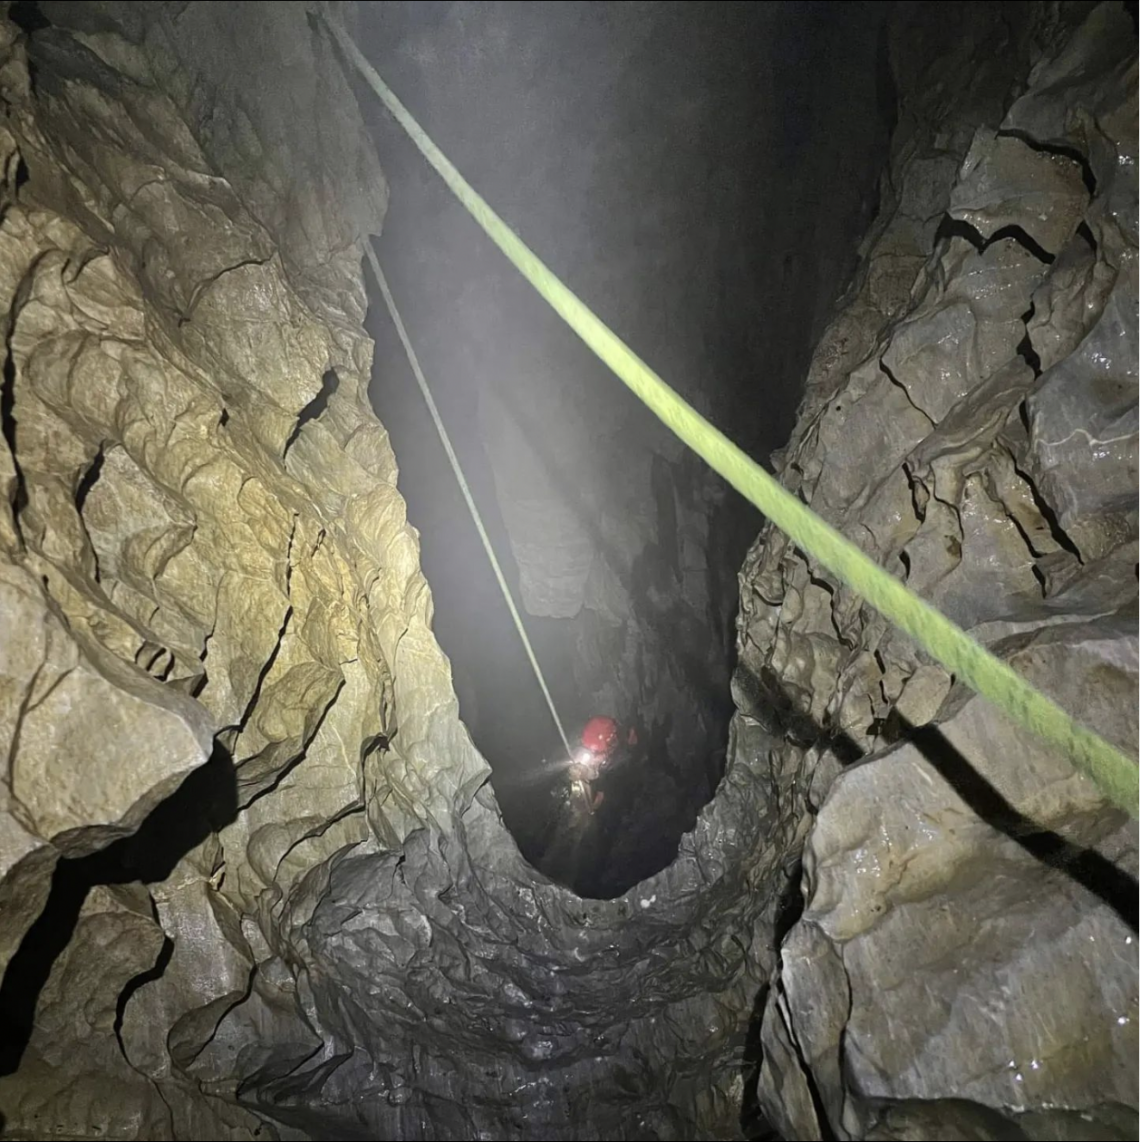 This image shows a person with a red helmet and a head lamp lowering themselves into a big cavern on a green rope. This person is caving in a cave system near Port Alberni on Vancouver Island.